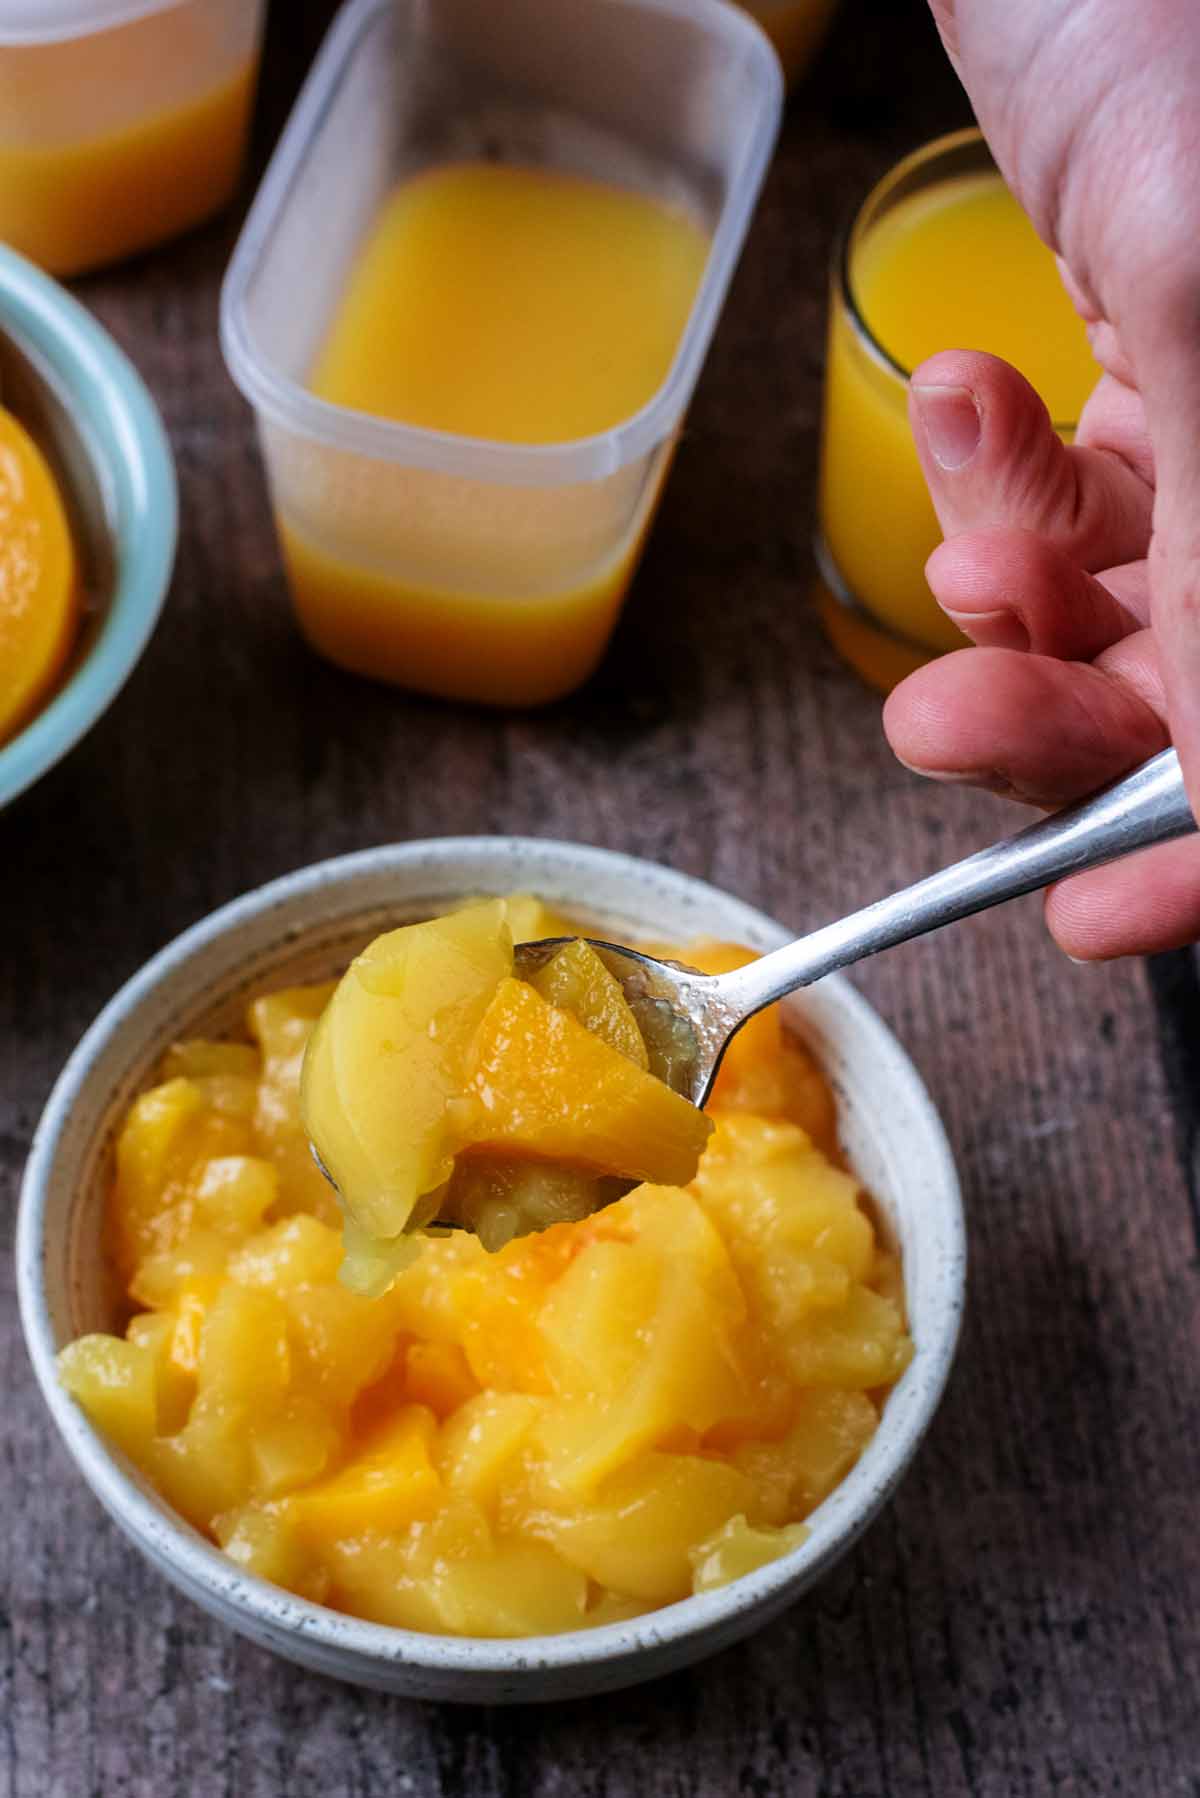 A spoon lifting some orange jelly from a bowl.